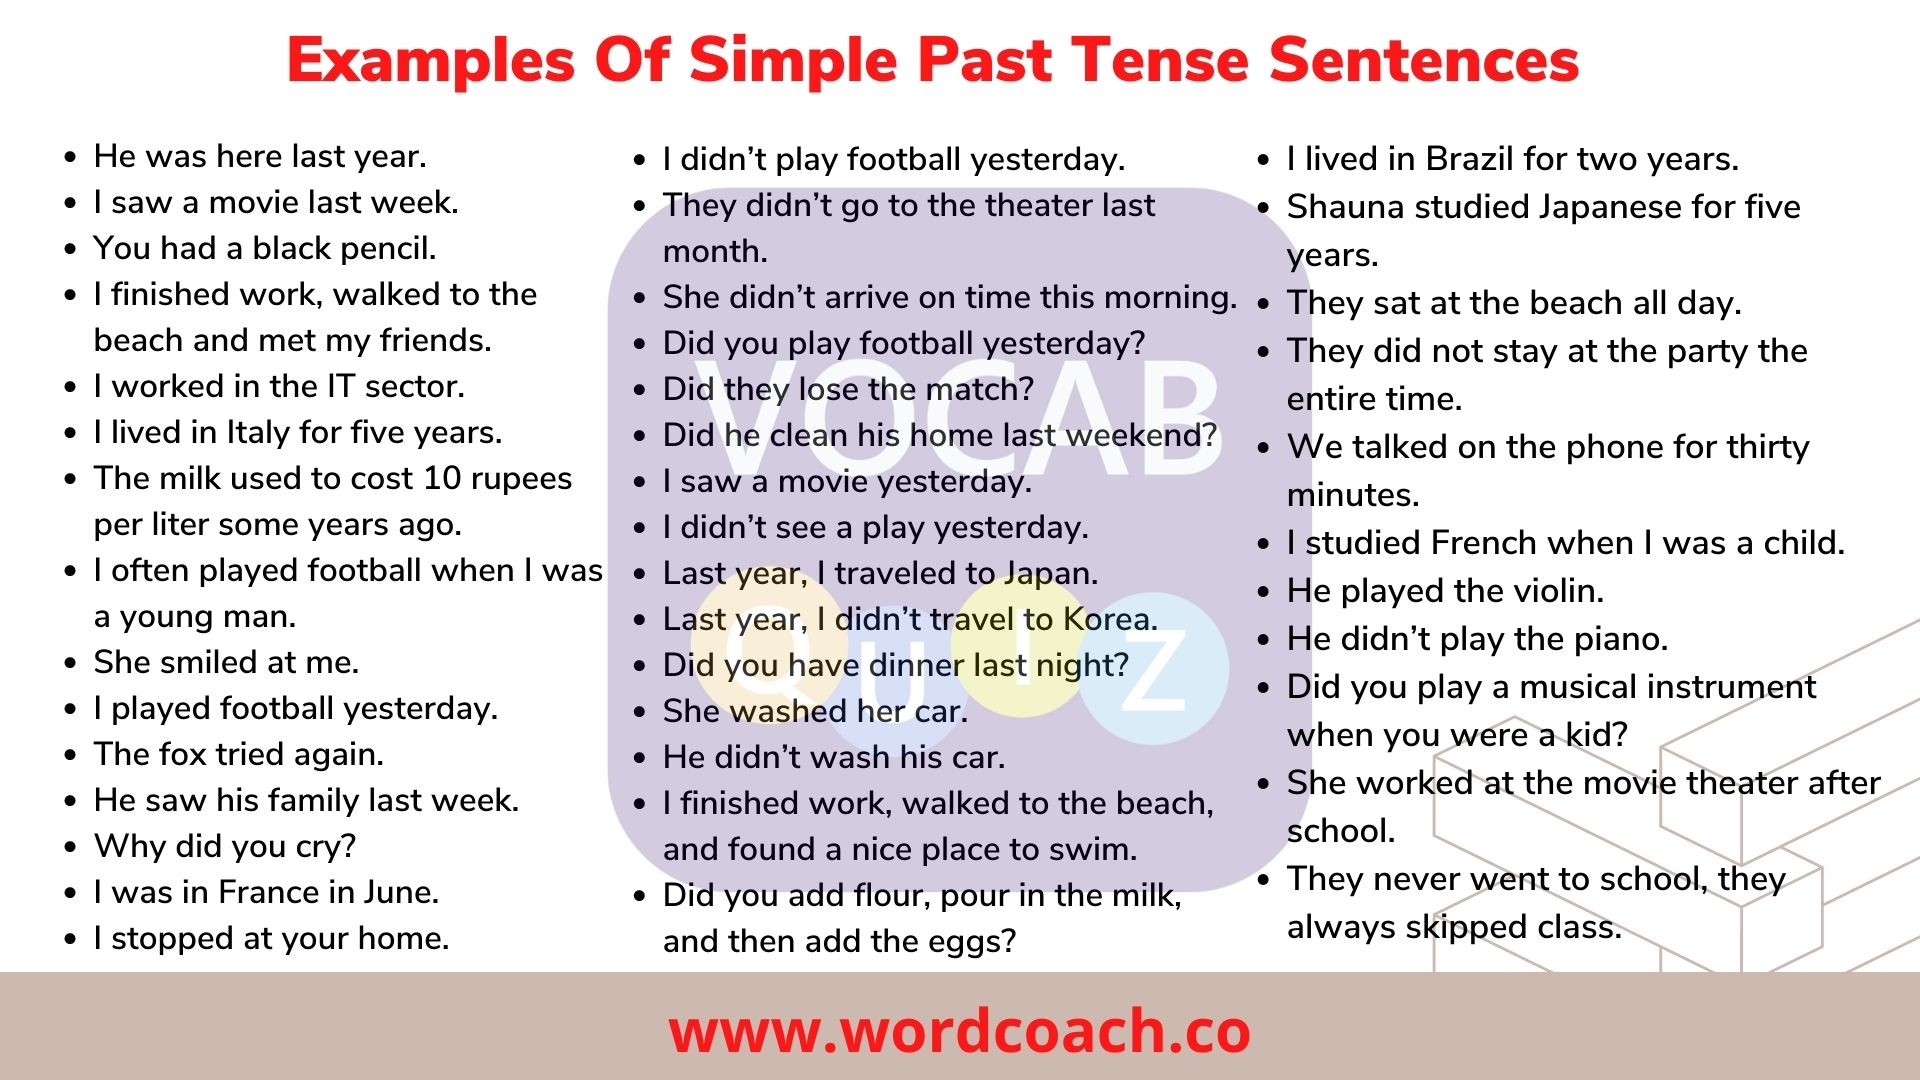 Examples Of Simple Past Tense Sentences - wordcoach.co